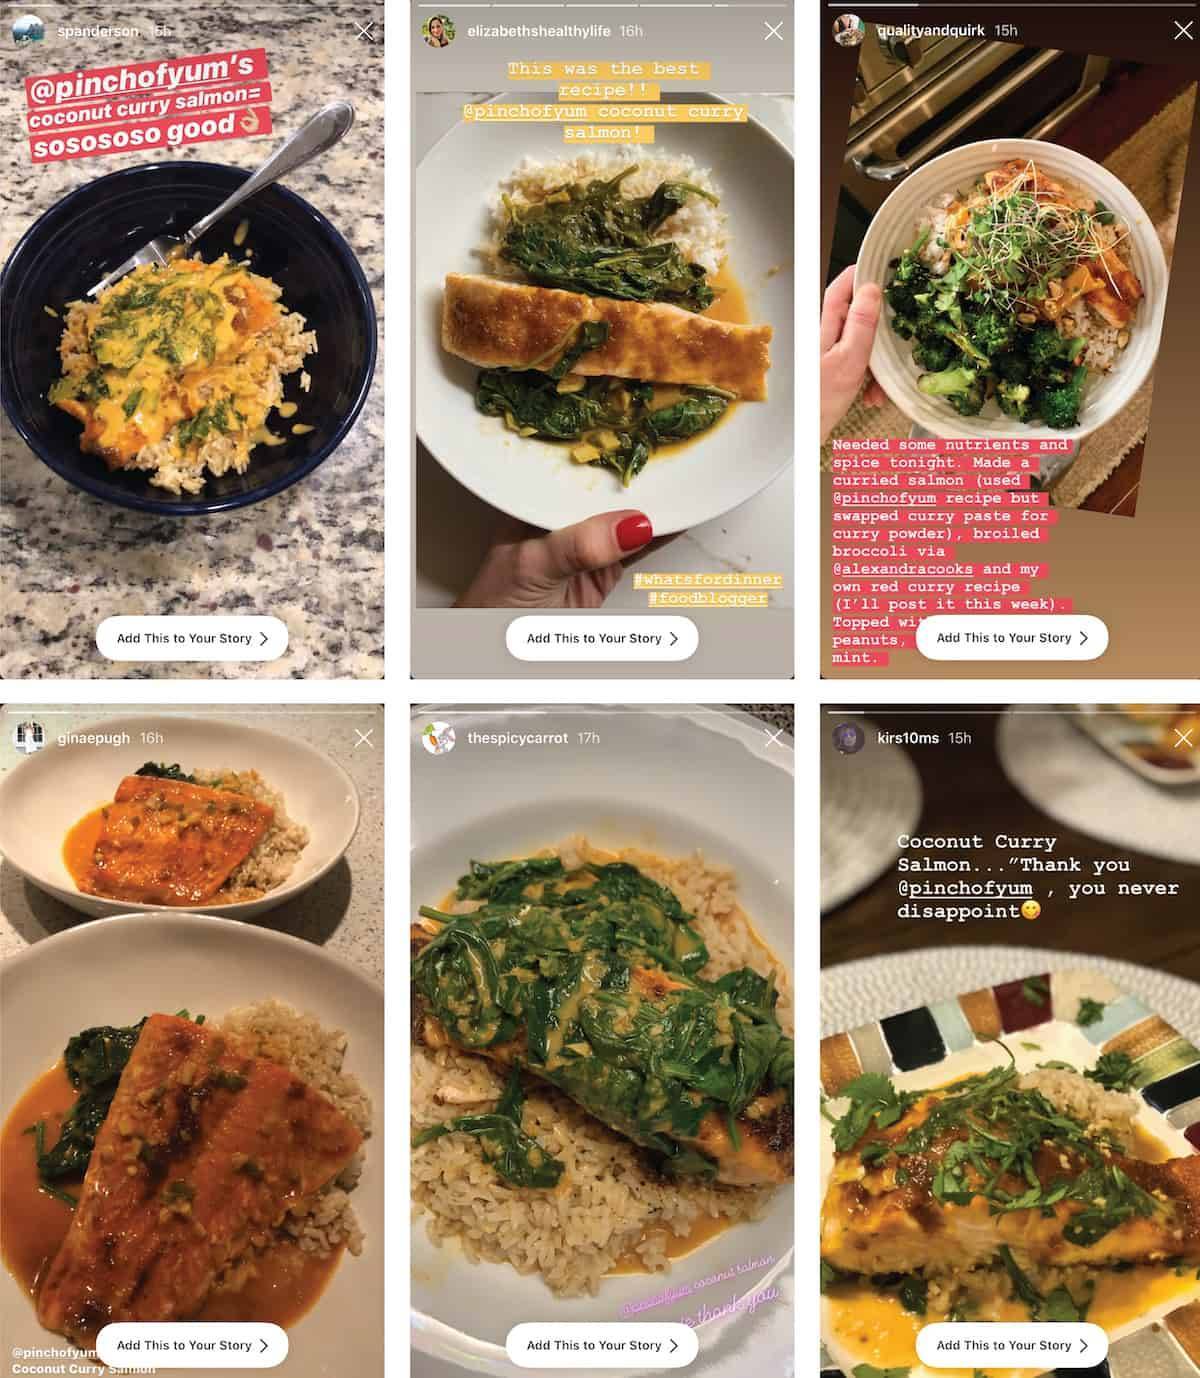 Instagram story images of Coconut Curry Salmon.